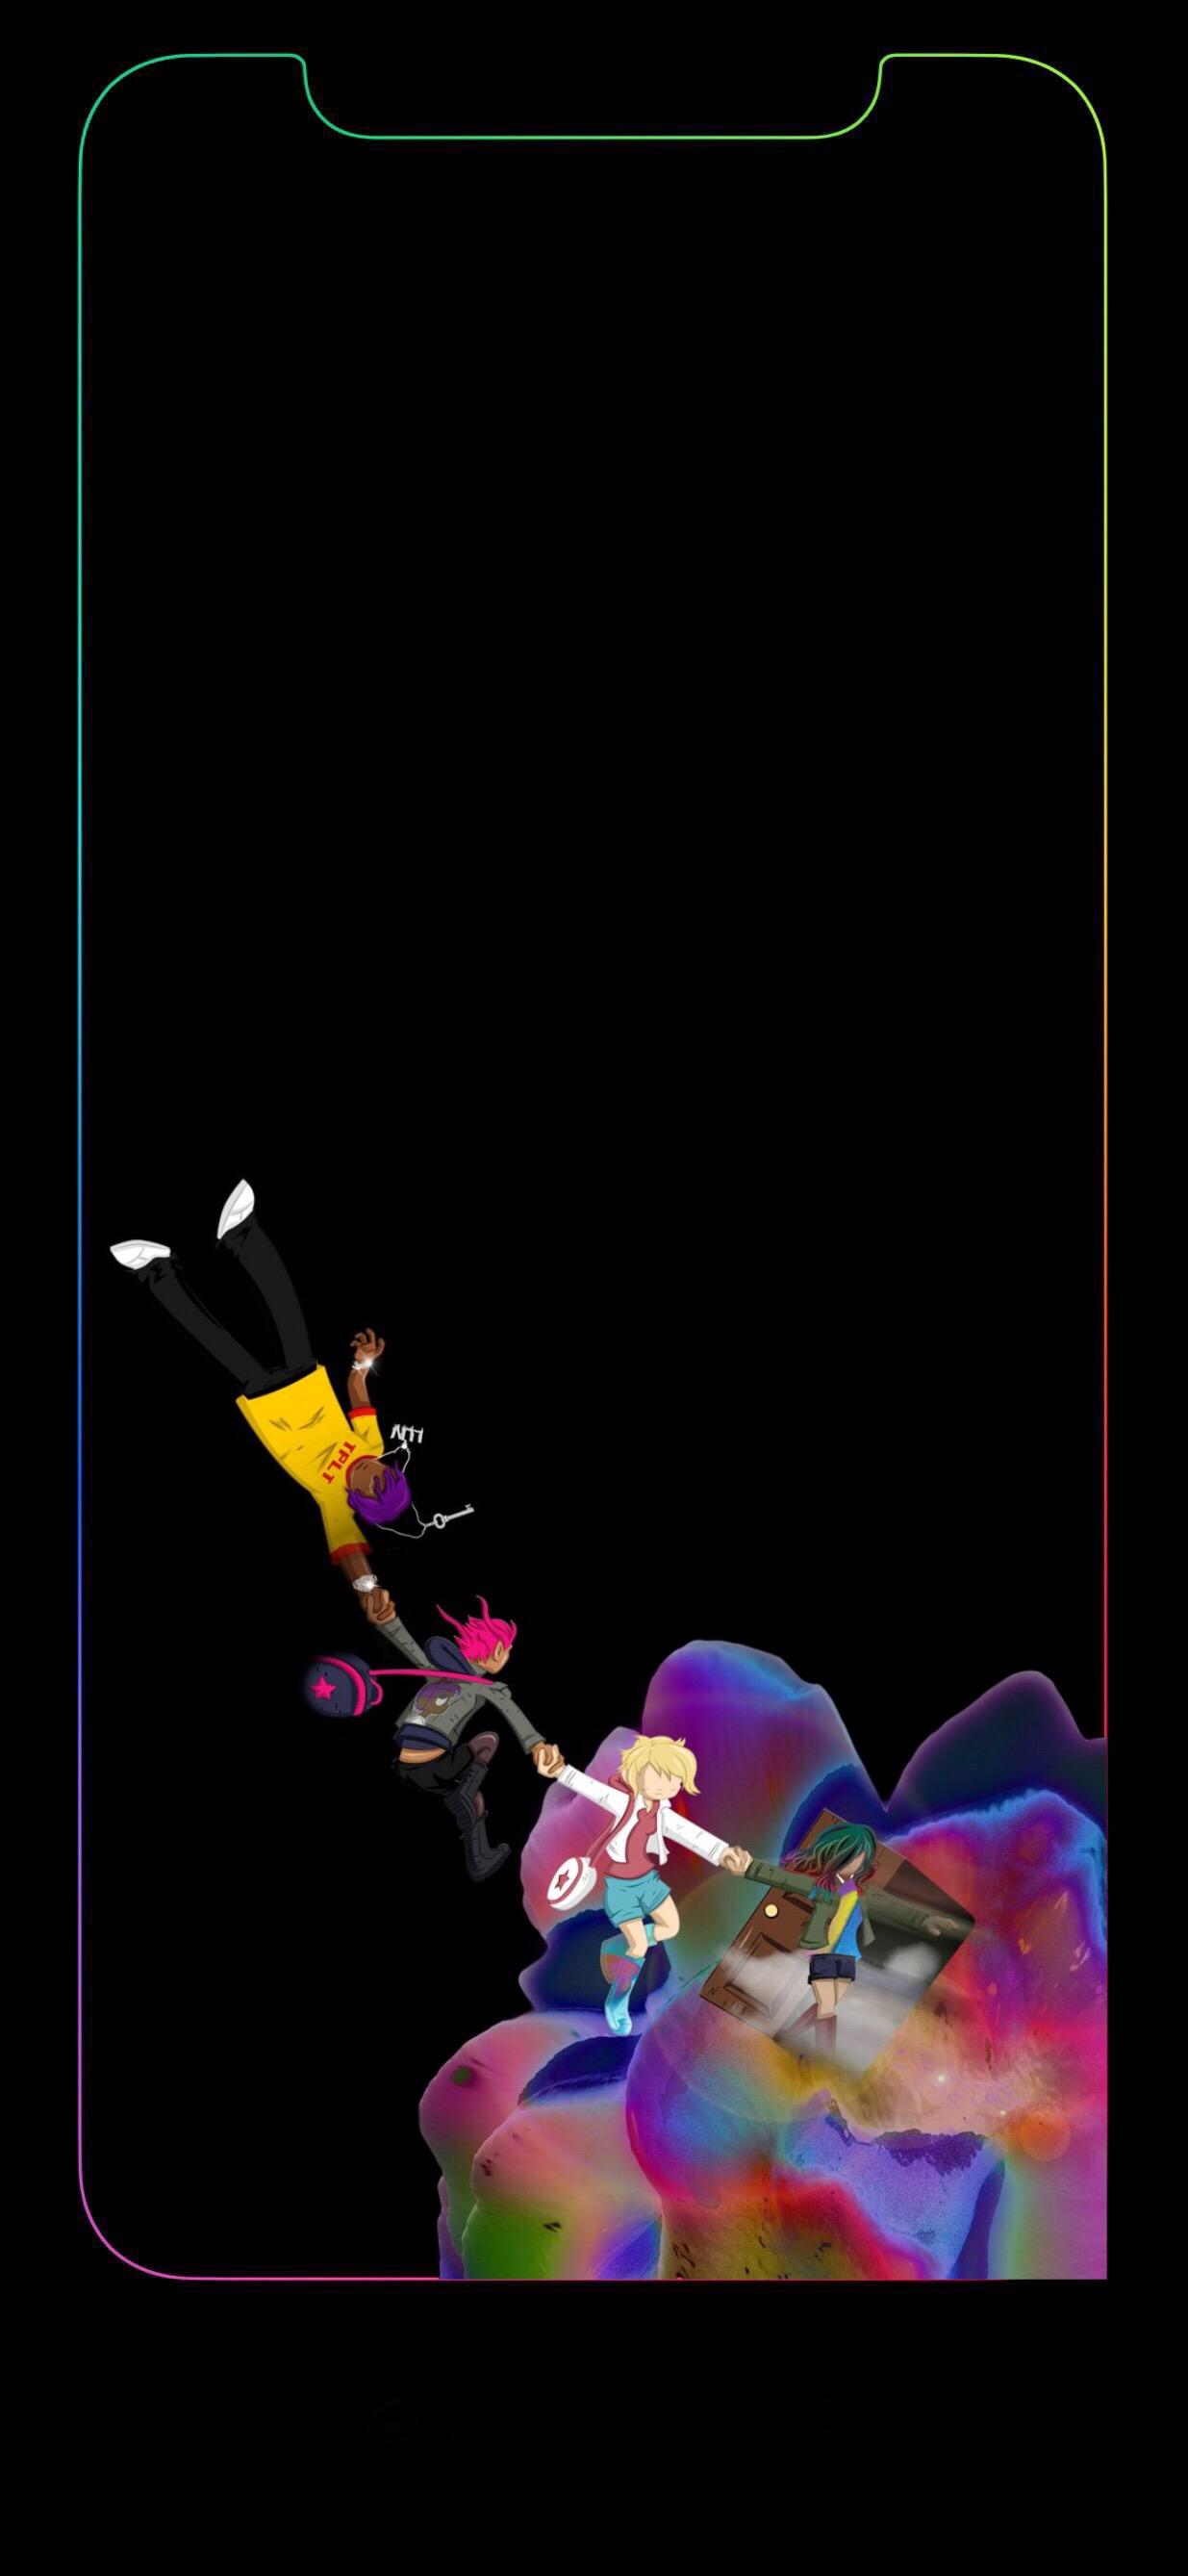 iPhone X The Perfect LUV Tape wallpaper liluzivert